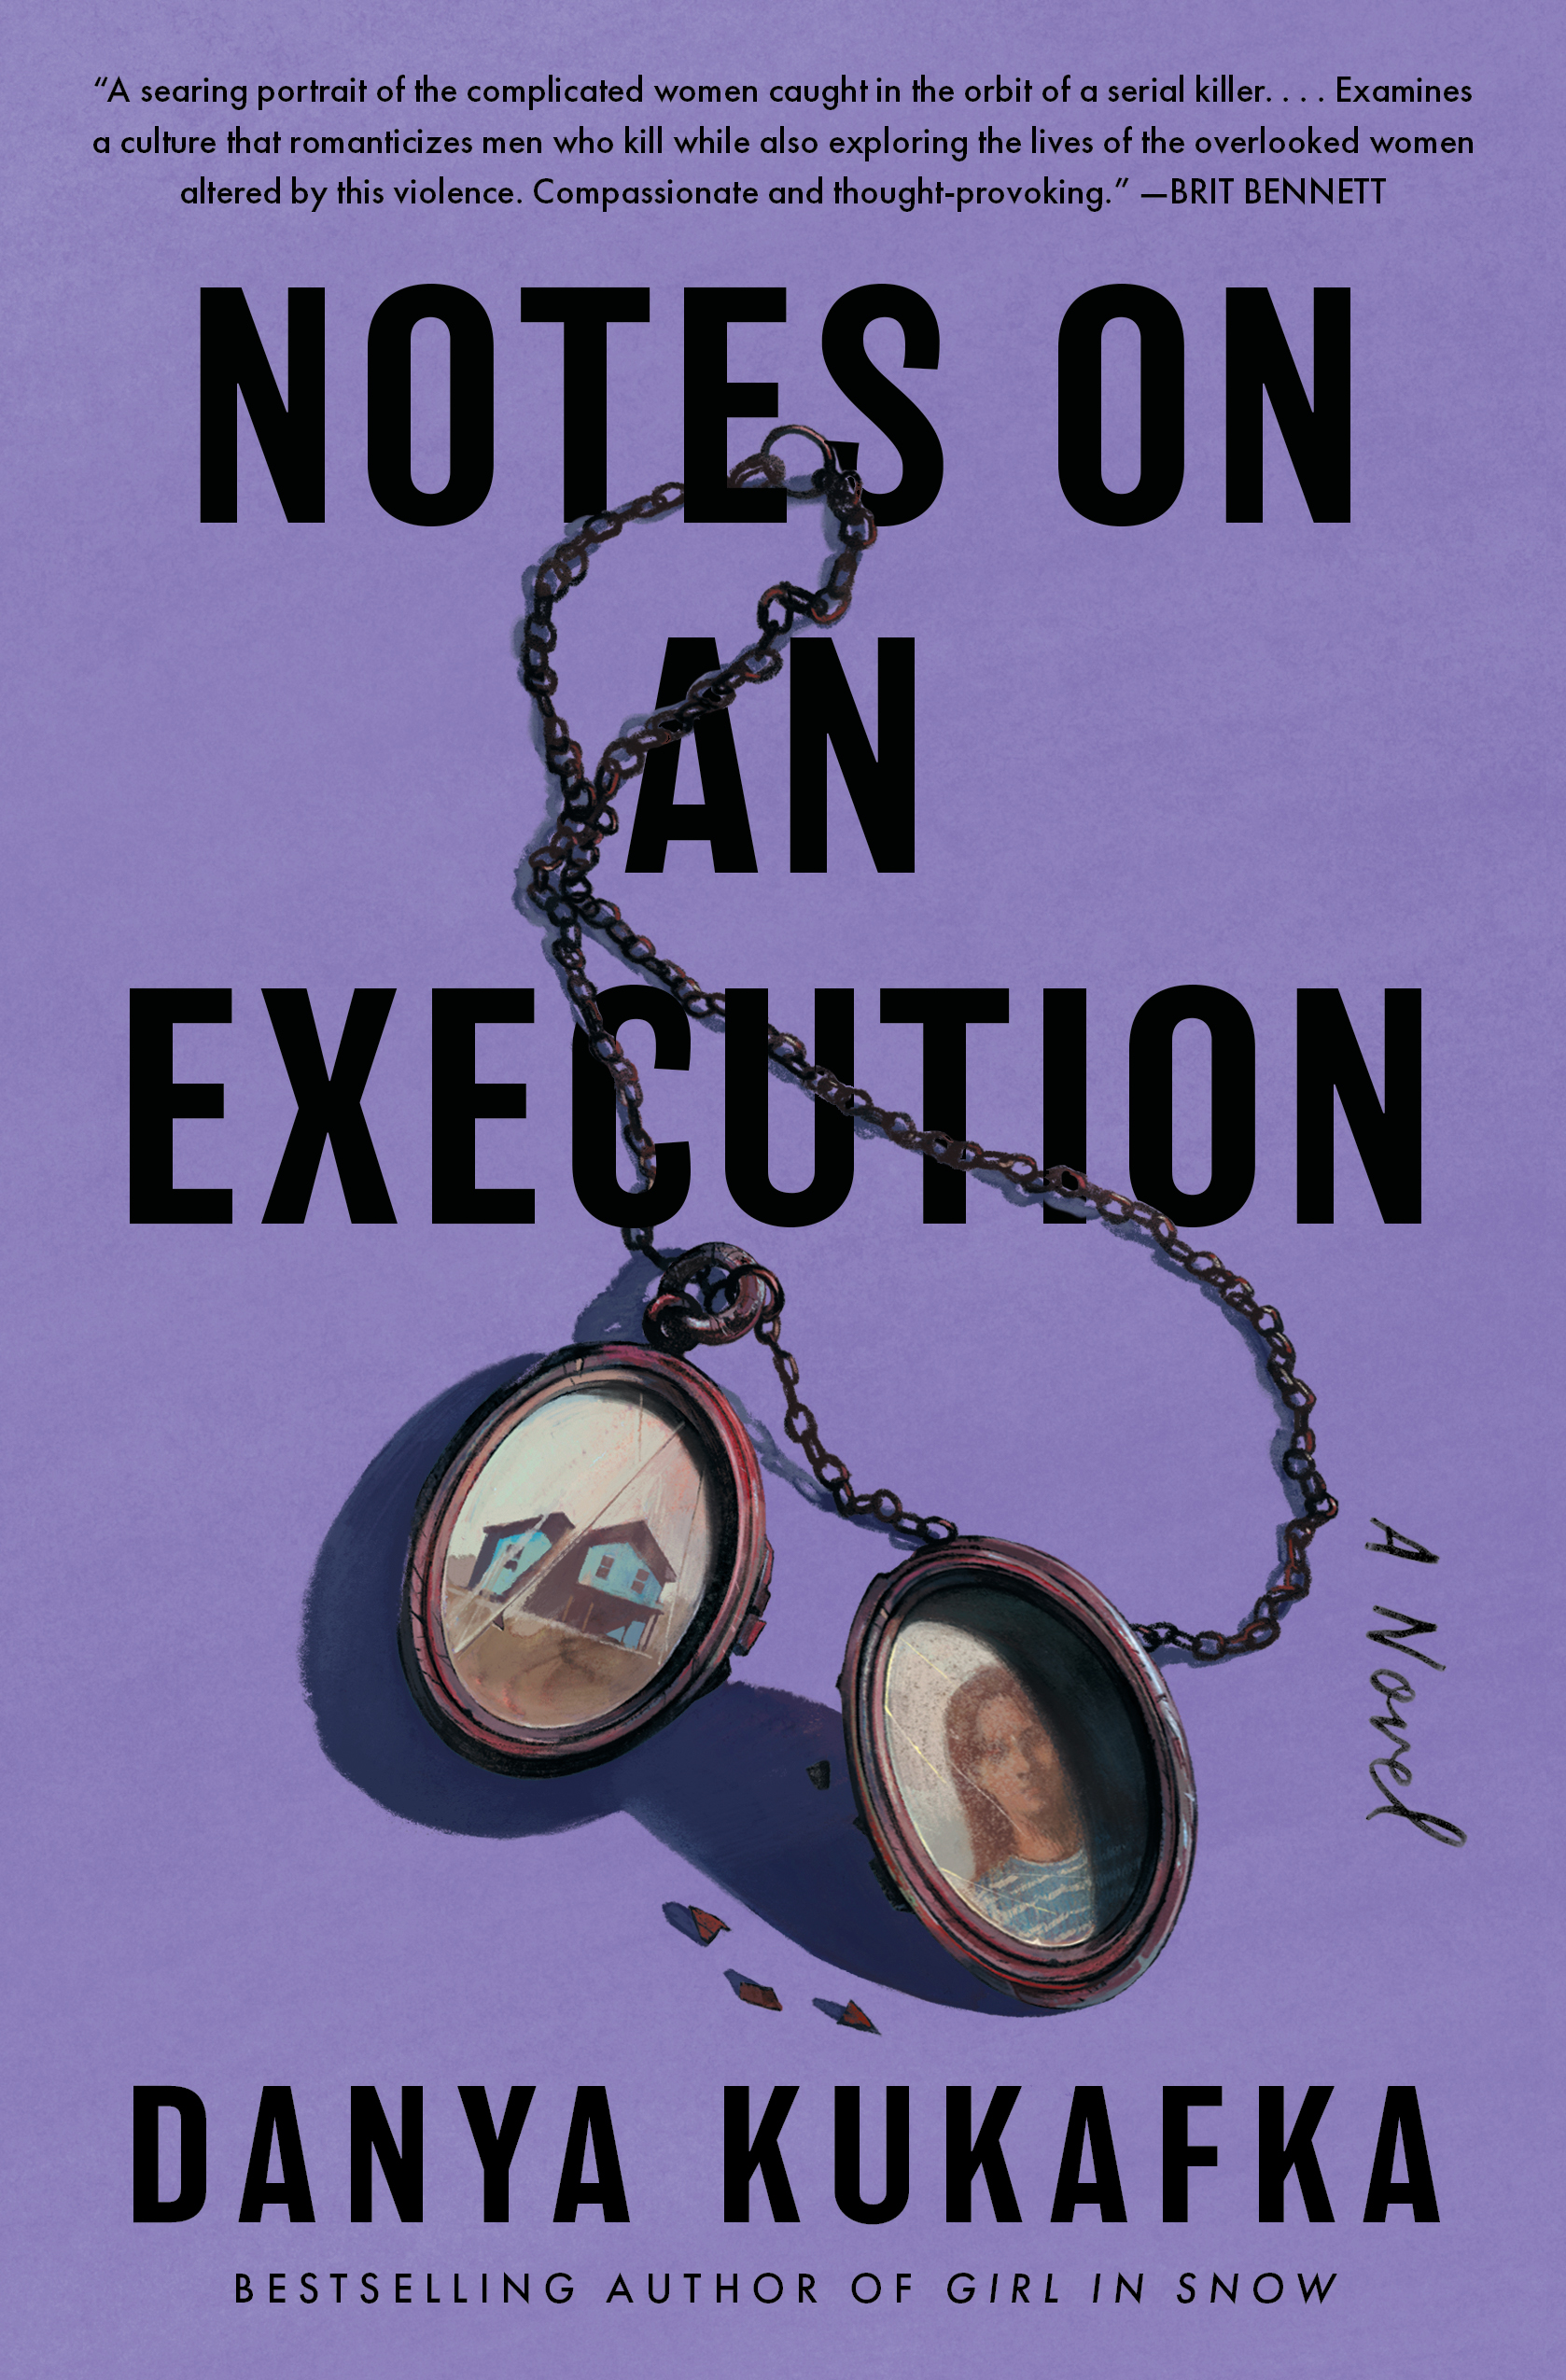 Book cover of Notes on an Execution that is purple with a broken locket